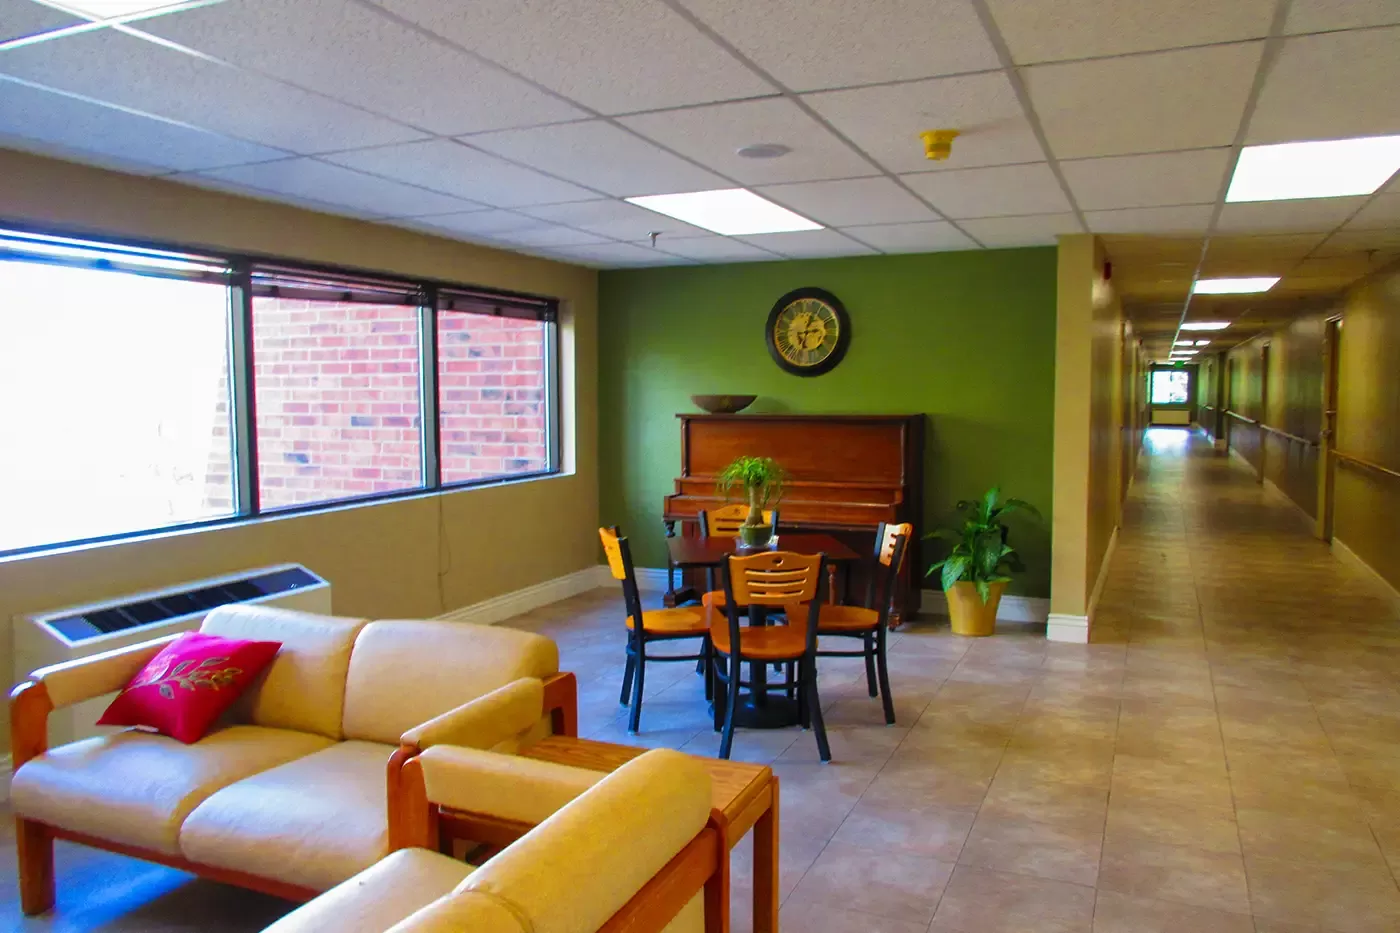 Photo of the interior of Ratekin Tower Apartments in Grand Junction, Colorado